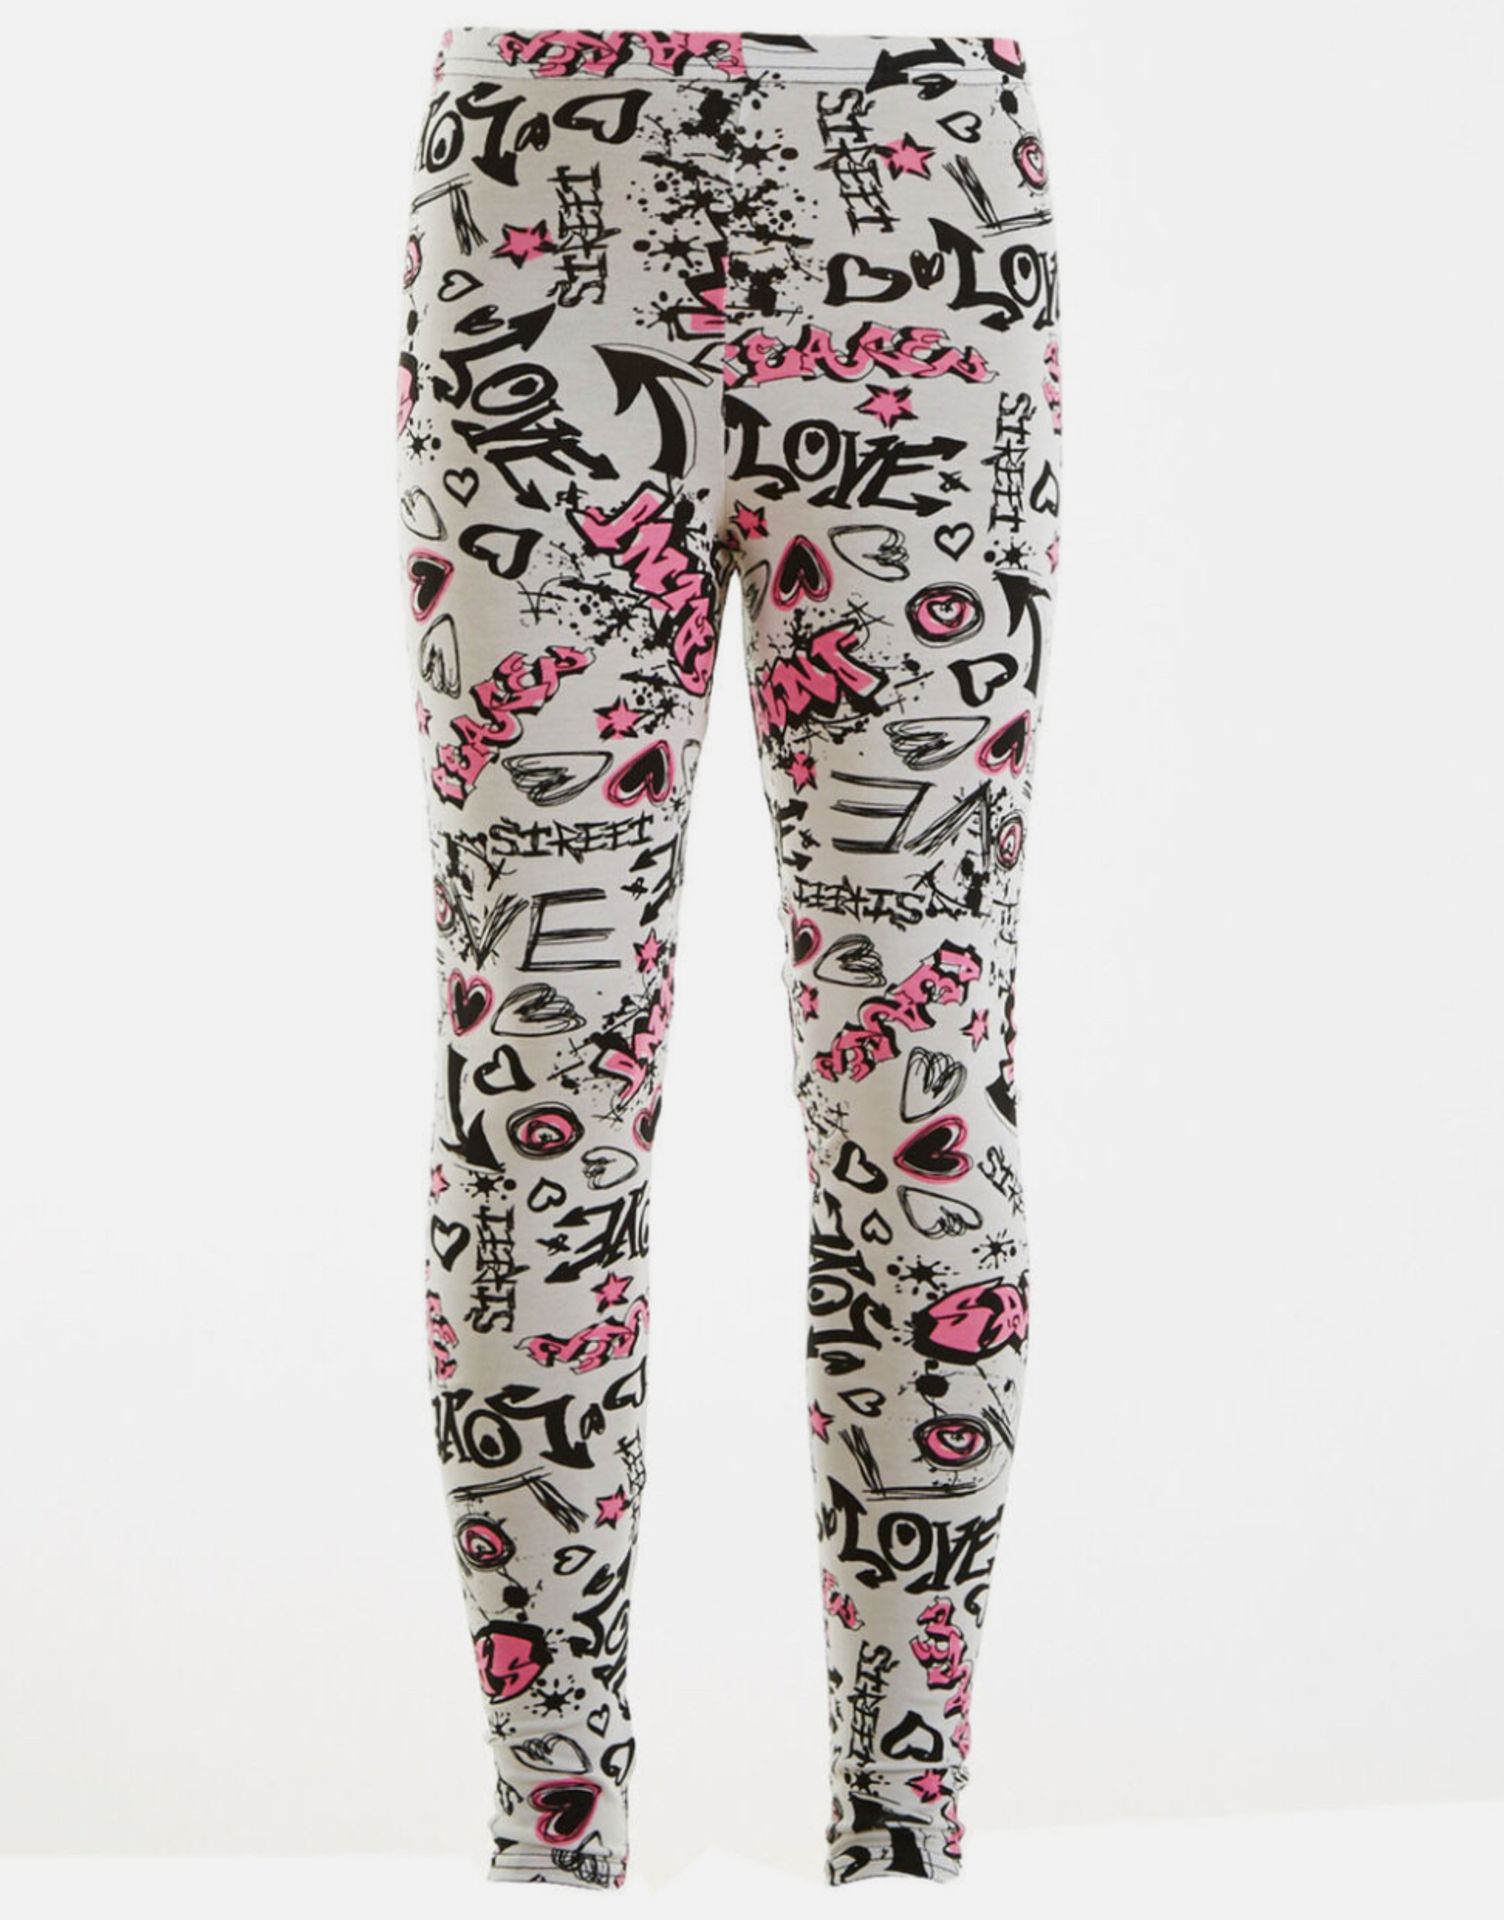 Large Quantity of Girl’s Fashion Leggings - Various Designs - Various Sizes - Image 4 of 4